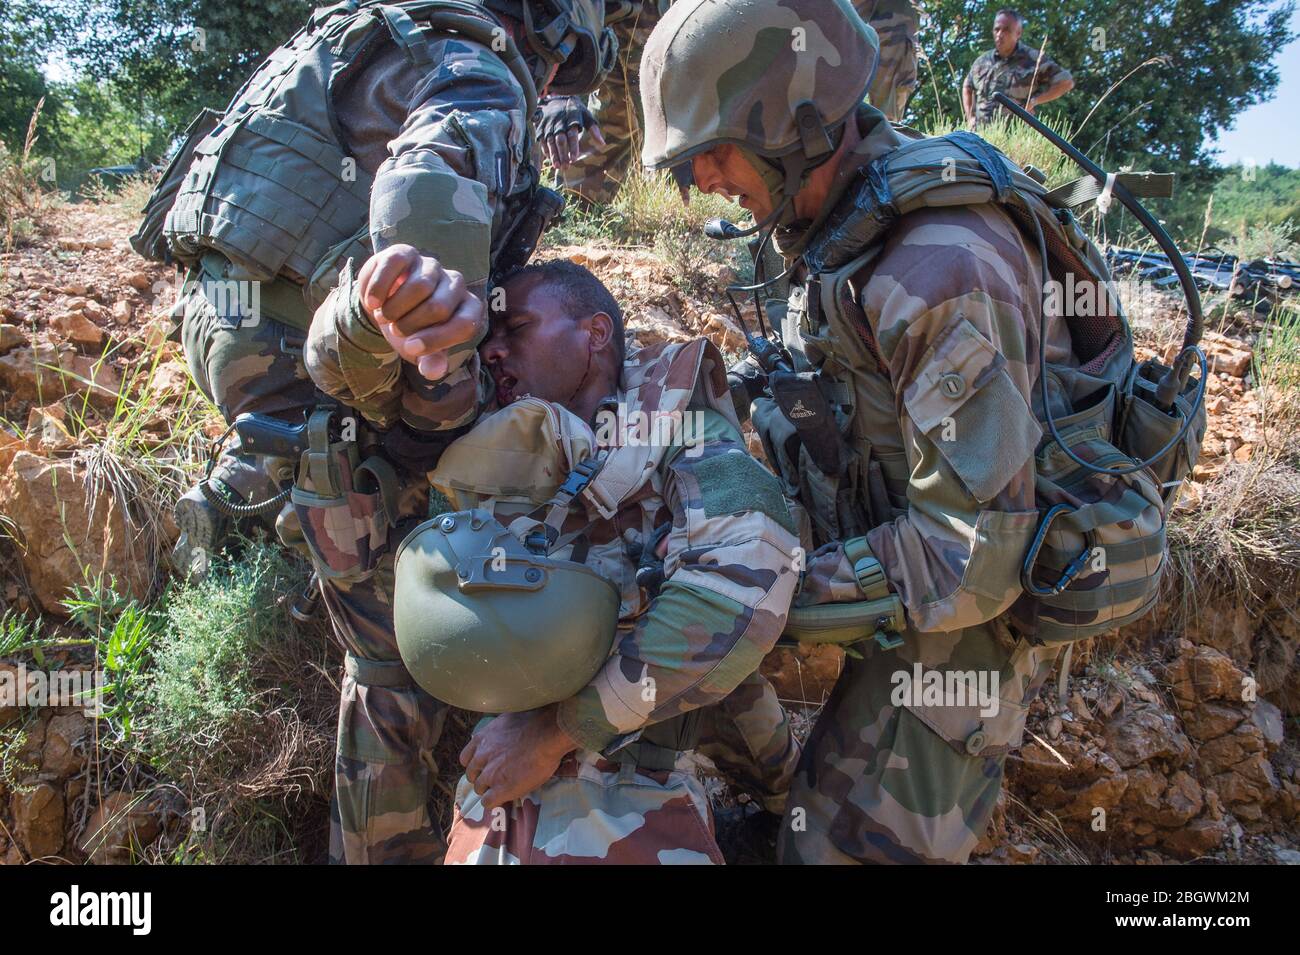 DRAGUIGNAN, FRANCE - JULY 21: Soldiers rescuing a fake wounded man during simulated conflict between soldiers and terrorists, with fake corpses, fake Stock Photo